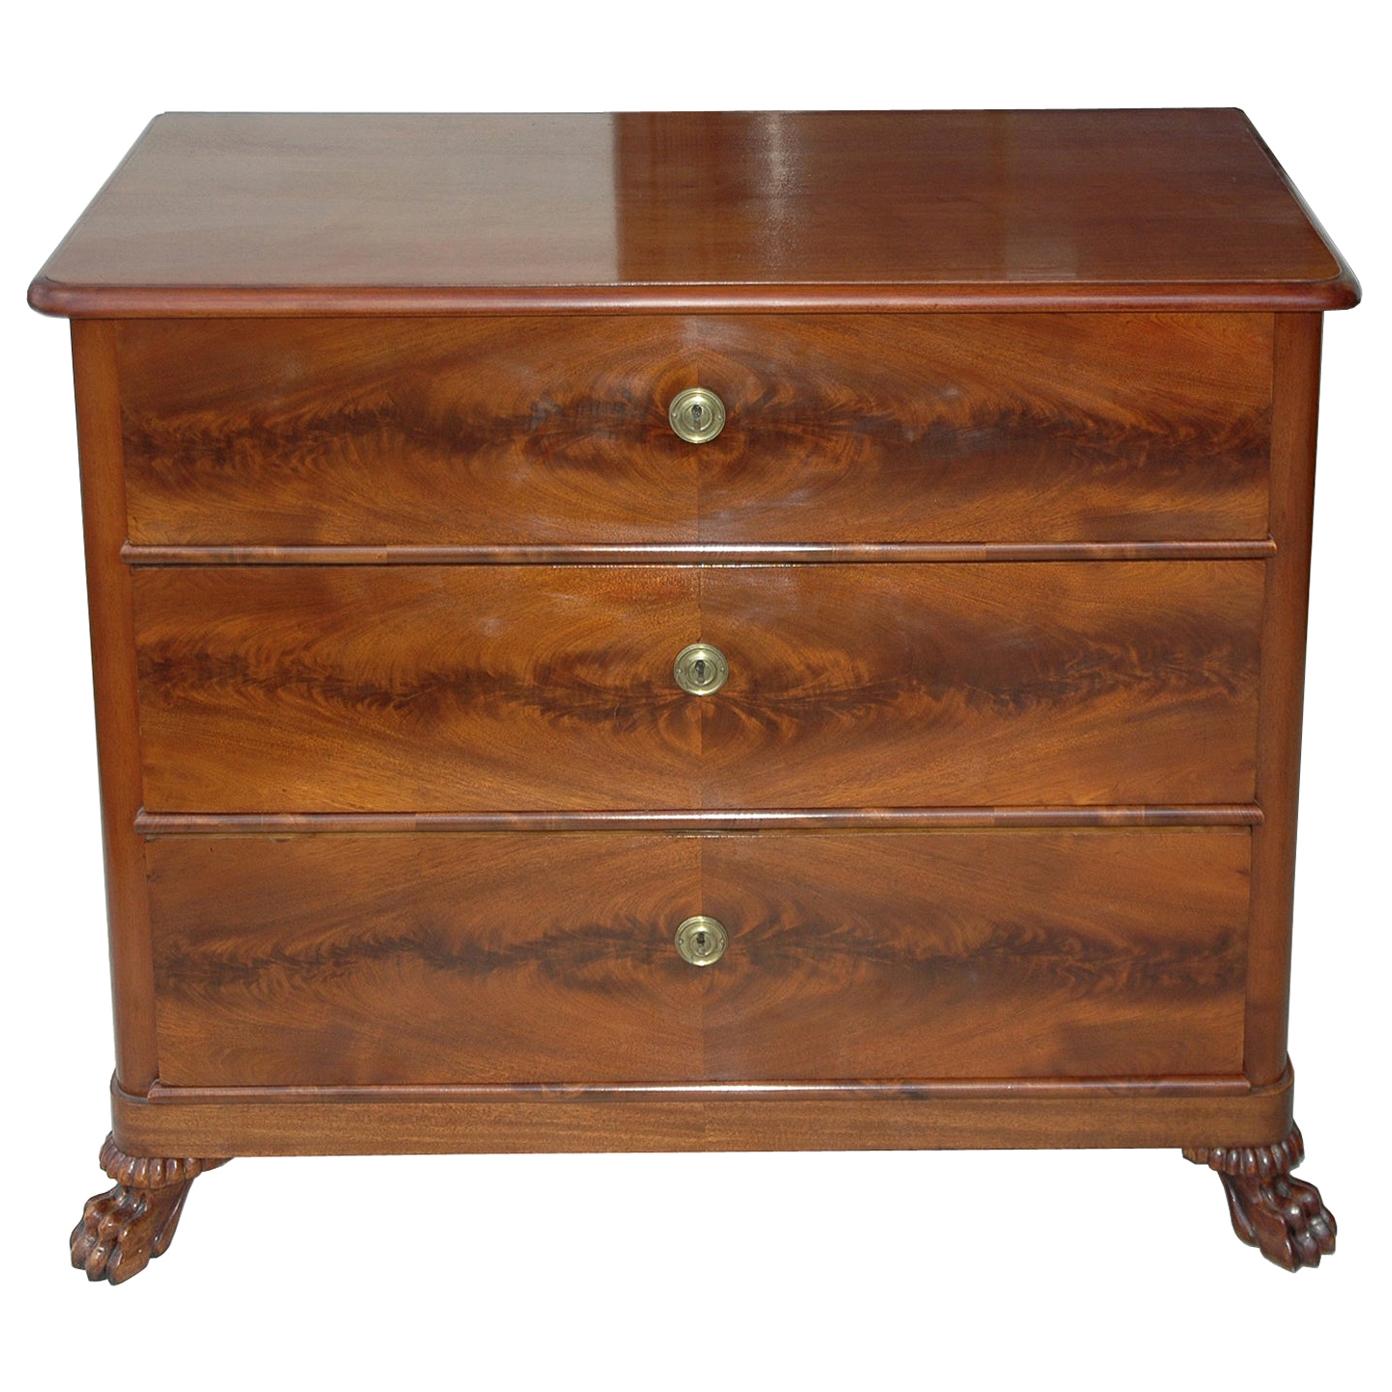 Empire Chest of Drawers in West Indies Mahogany, Denmark, circa 1820